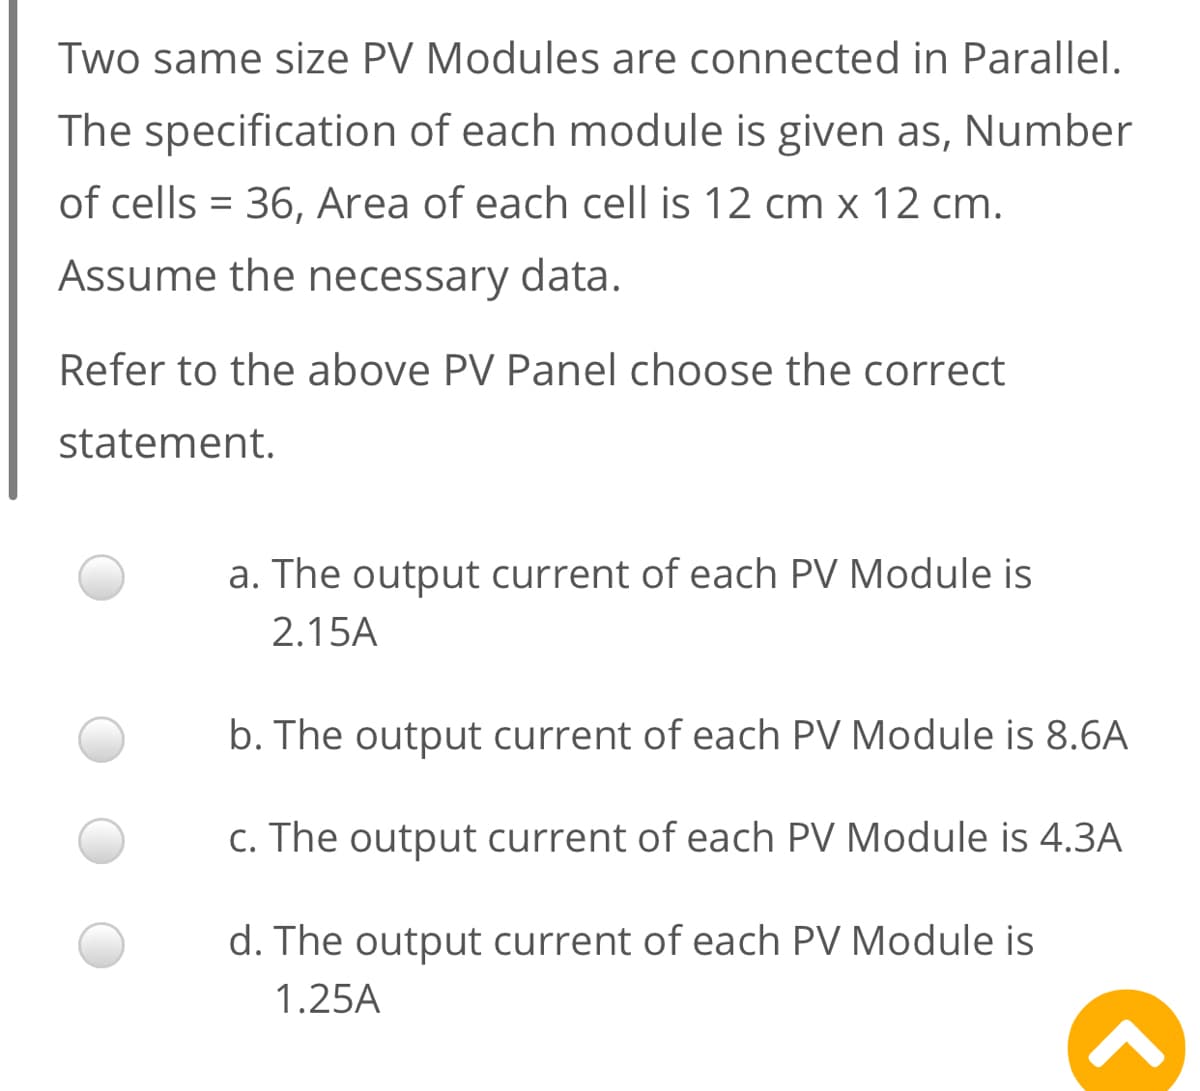 Two same size PV Modules are connected in Parallel.
The specification of each module is given as, Number
of cells = 36, Area of each cell is 12 cm x 12 cm.
Assume the necessary data.
Refer to the above PV Panel choose the correct
statement.
a. The output current of each PV Module is
2.15A
b. The output current of each PV Module is 8.6A
c. The output current of each PV Module is 4.3A
d. The output current of each PV Module is
1.25A
